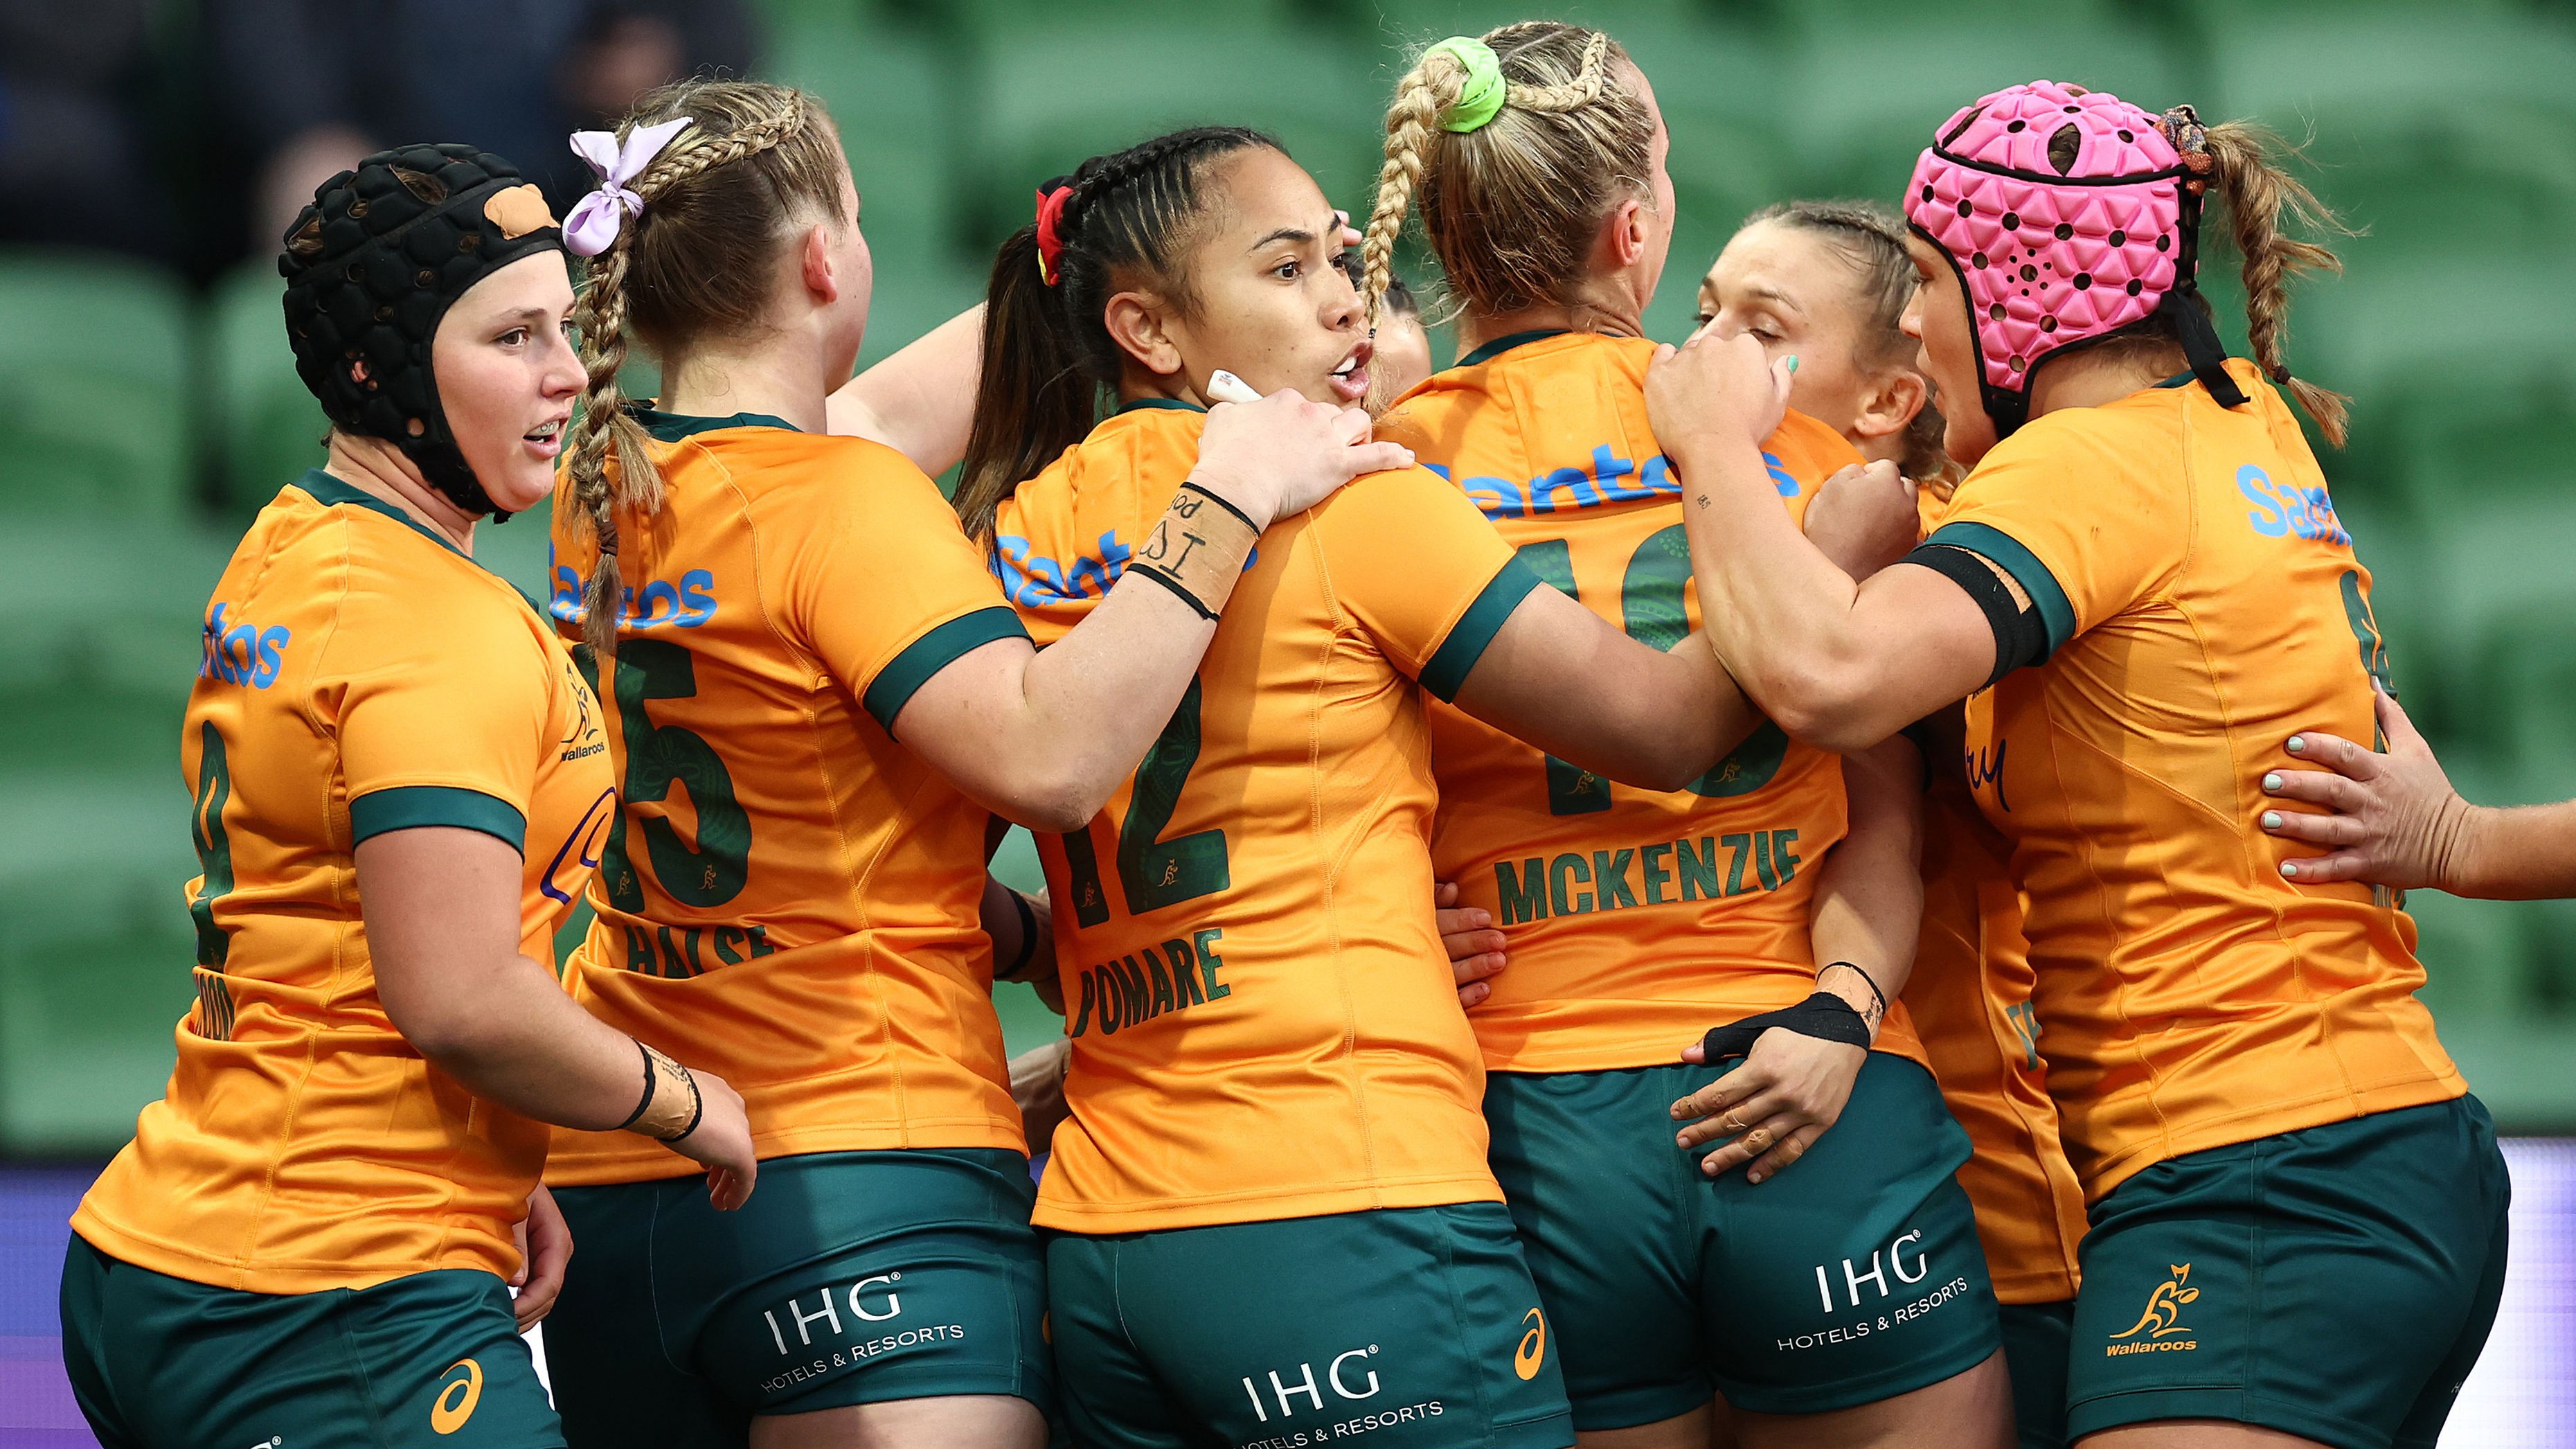 Desiree Miller of Australia is congratulated by teammates after scoring a try.